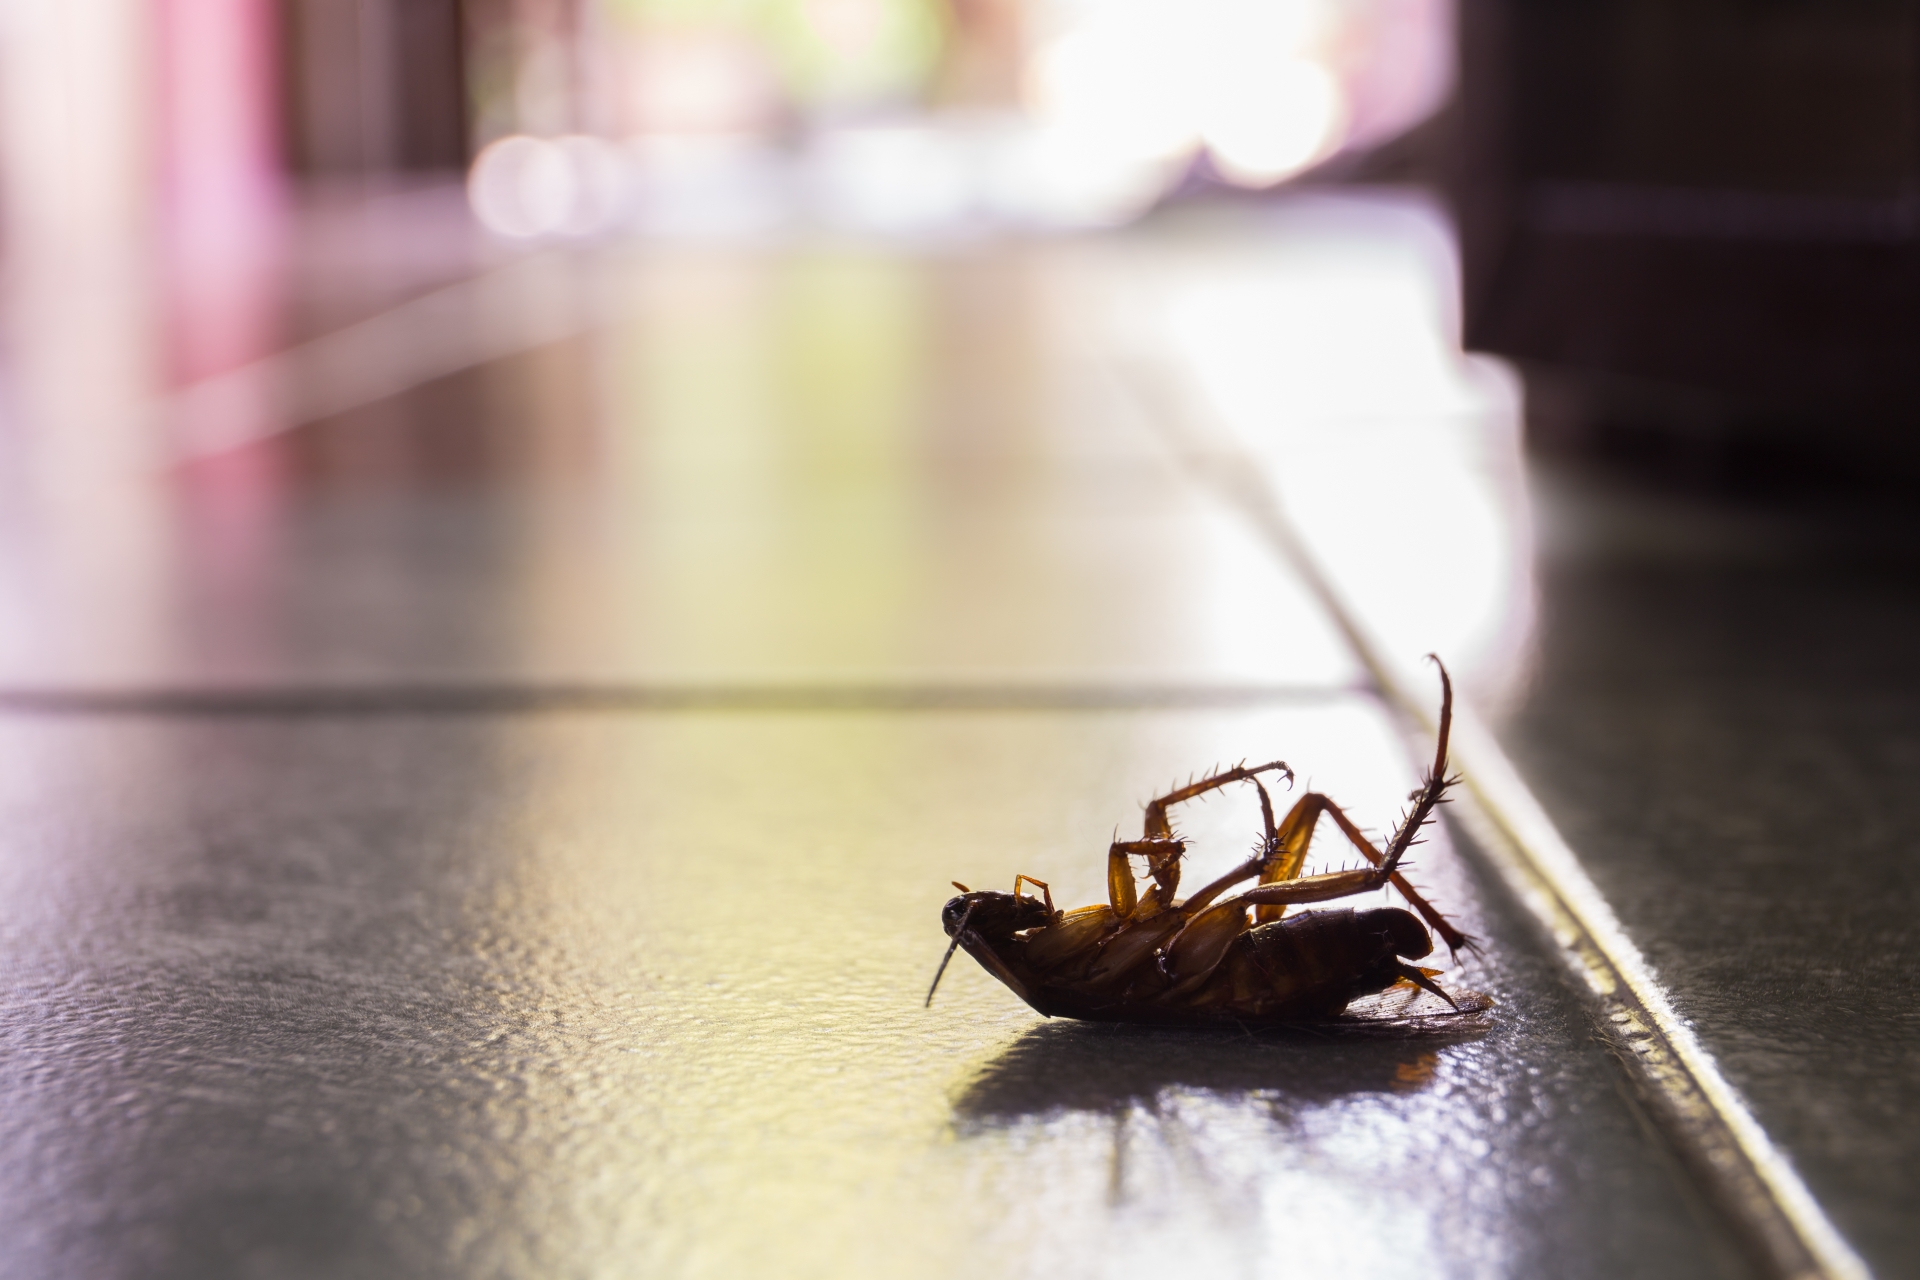 Cockroach Control, Pest Control in Thamesmead, SE28. Call Now 020 8166 9746